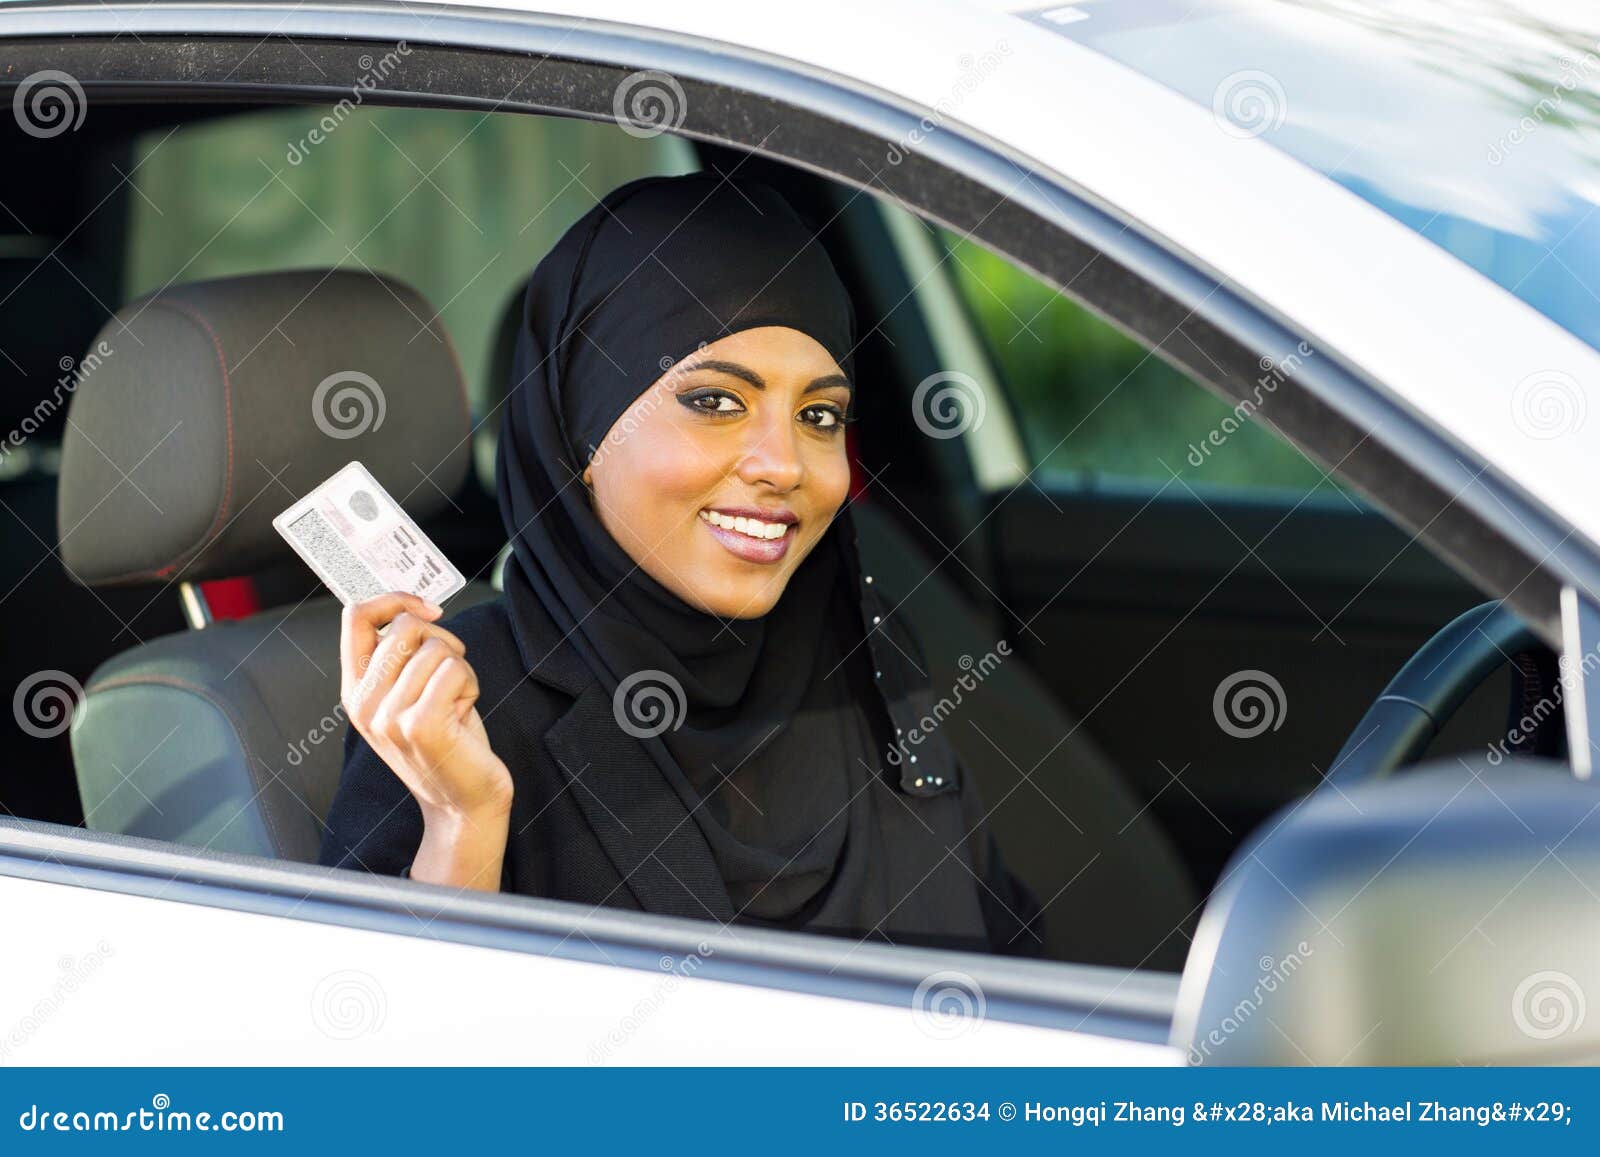 Malawi lifts ban on hijab for driving licenses